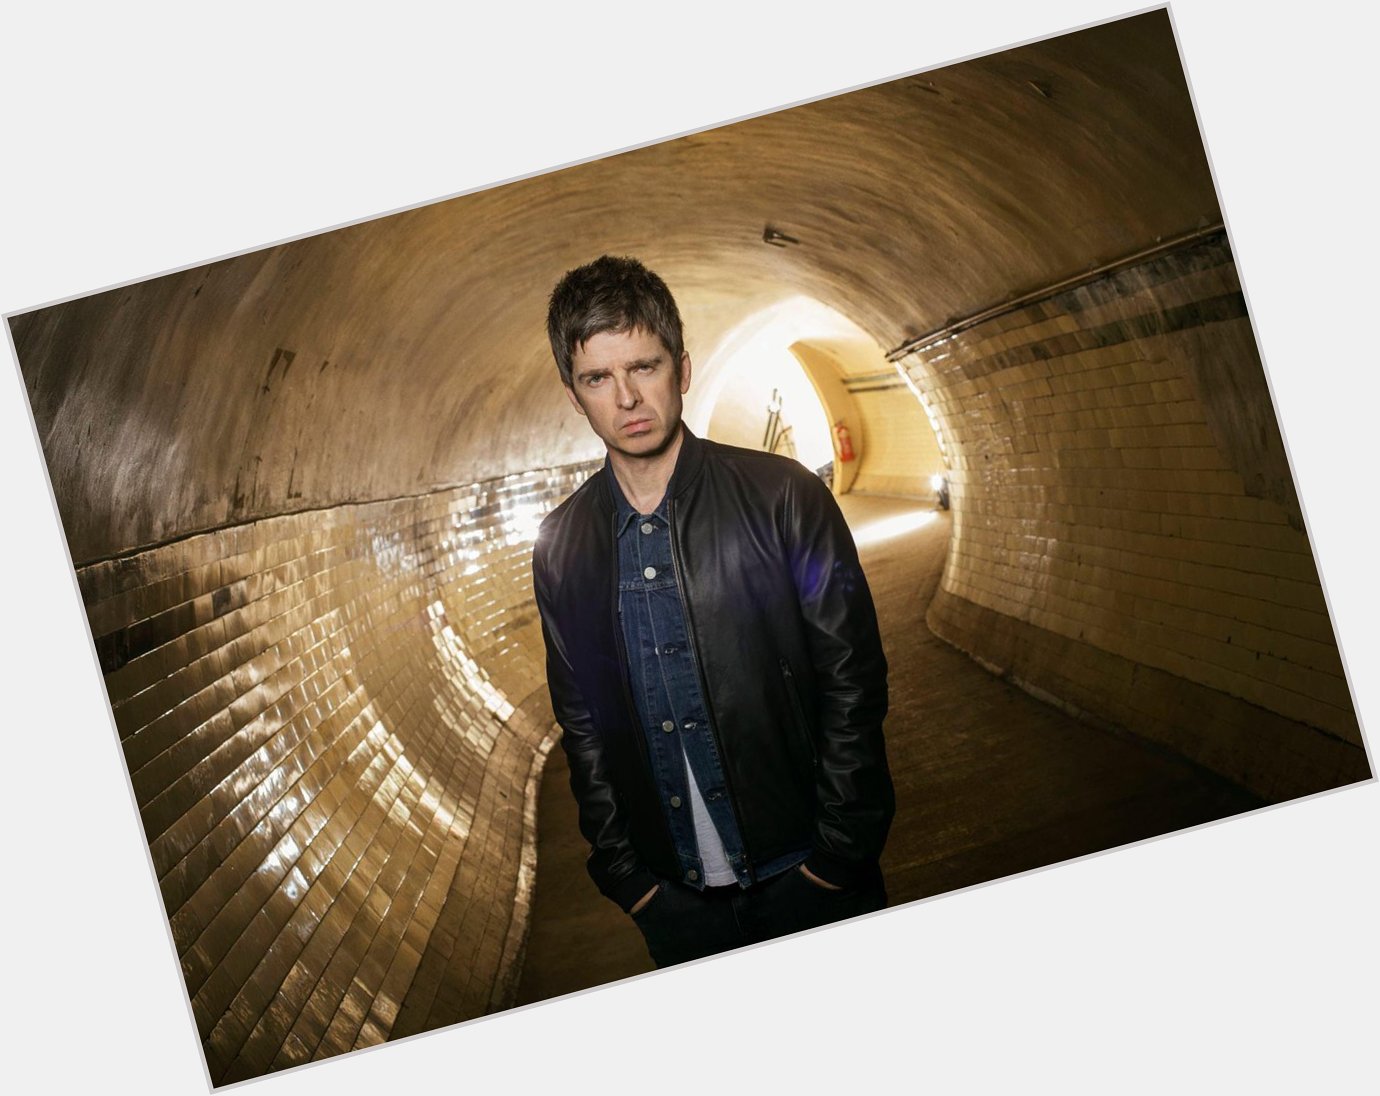 Happy Birthday to the legend that is Noel Gallagher! 48 today! This calls for a full day of listening to Noel! 